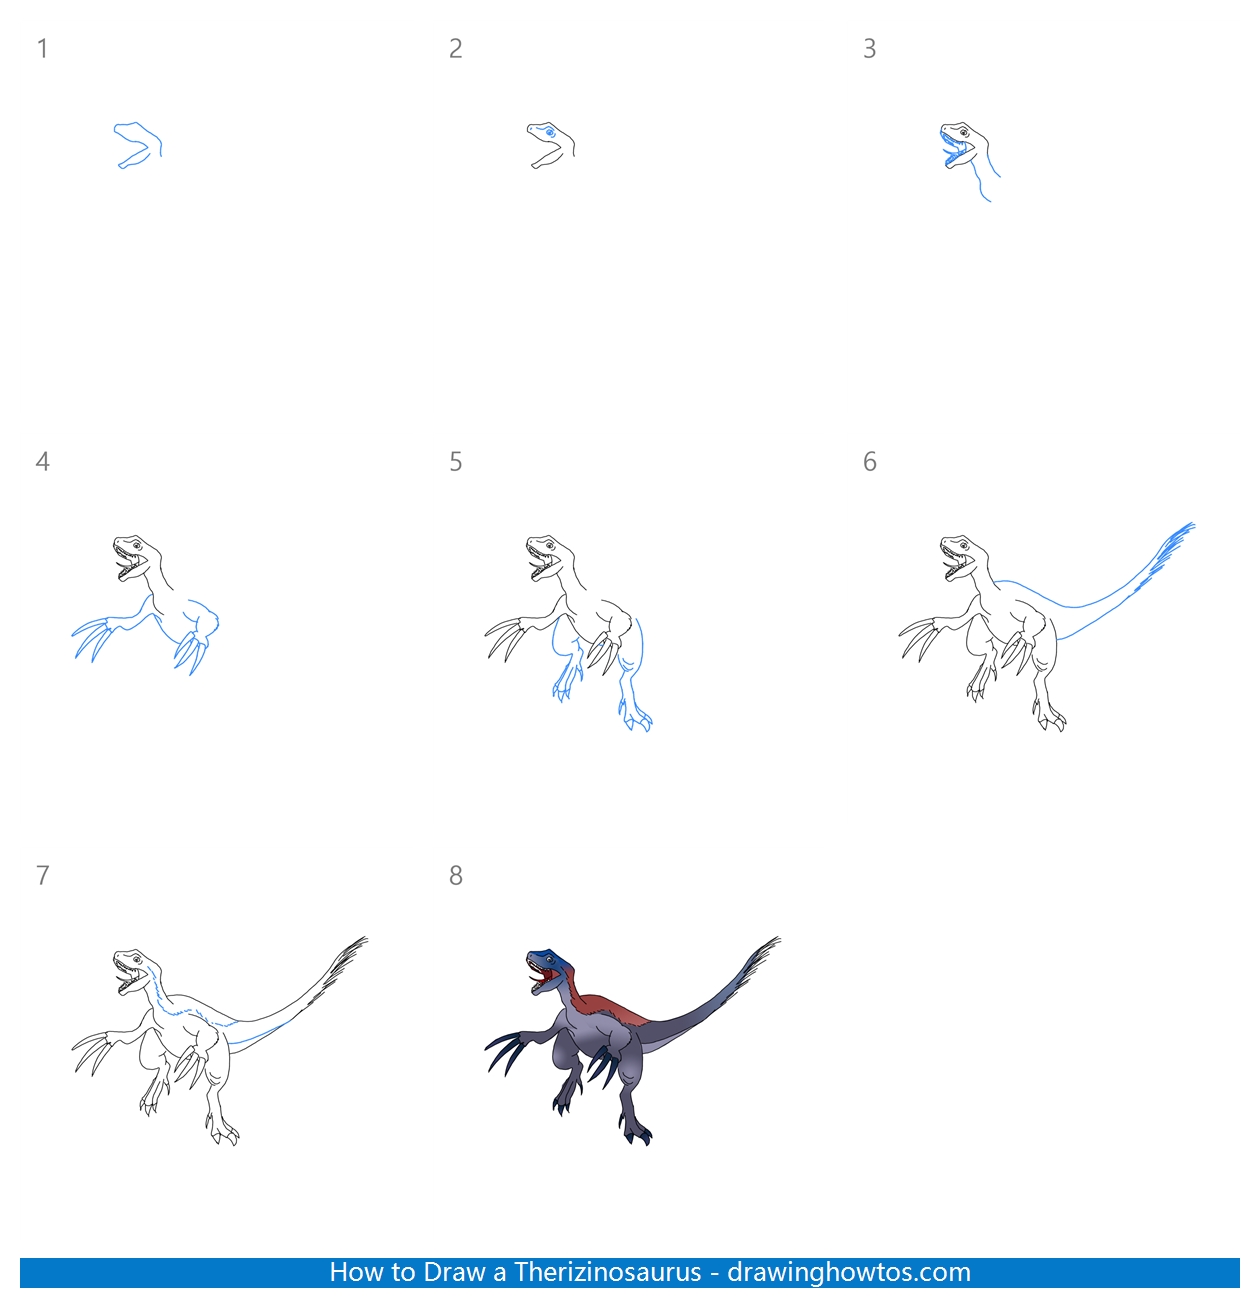 How to Draw a Therizinosaurus Step by Step